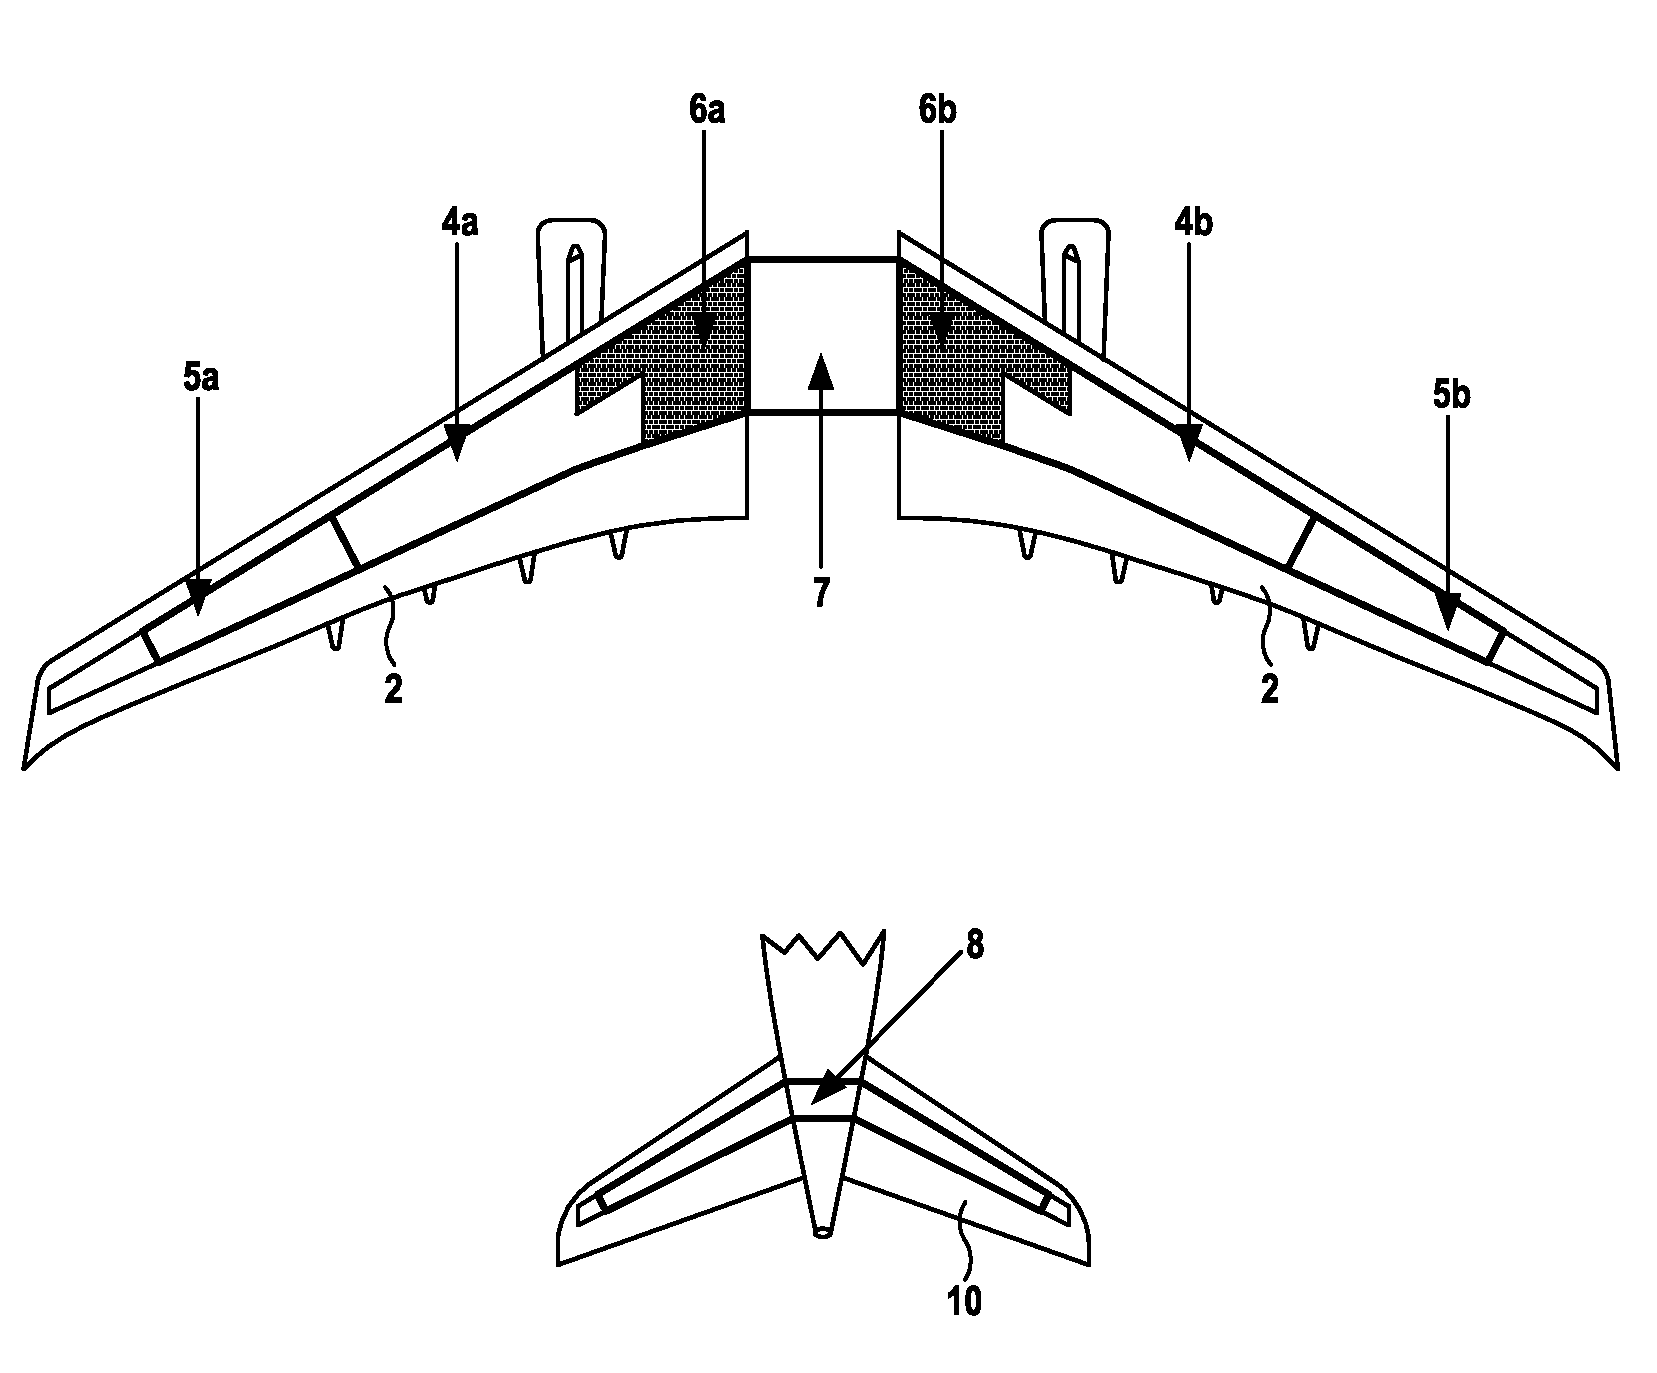 Method of controlling the centre of gravity of an aircraft